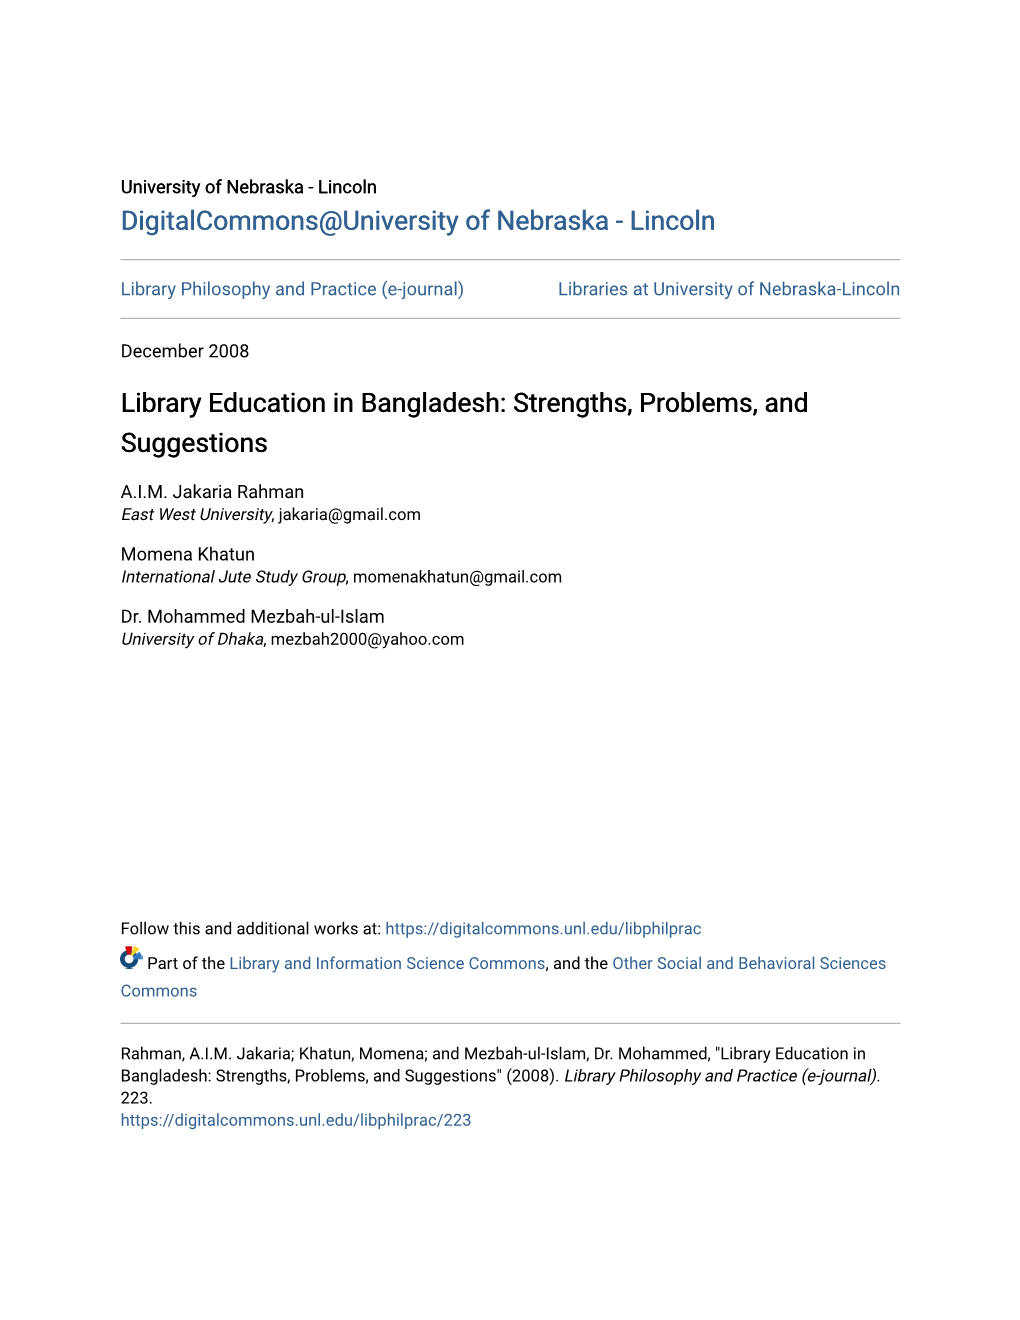 Library Education in Bangladesh: Strengths, Problems, and Suggestions